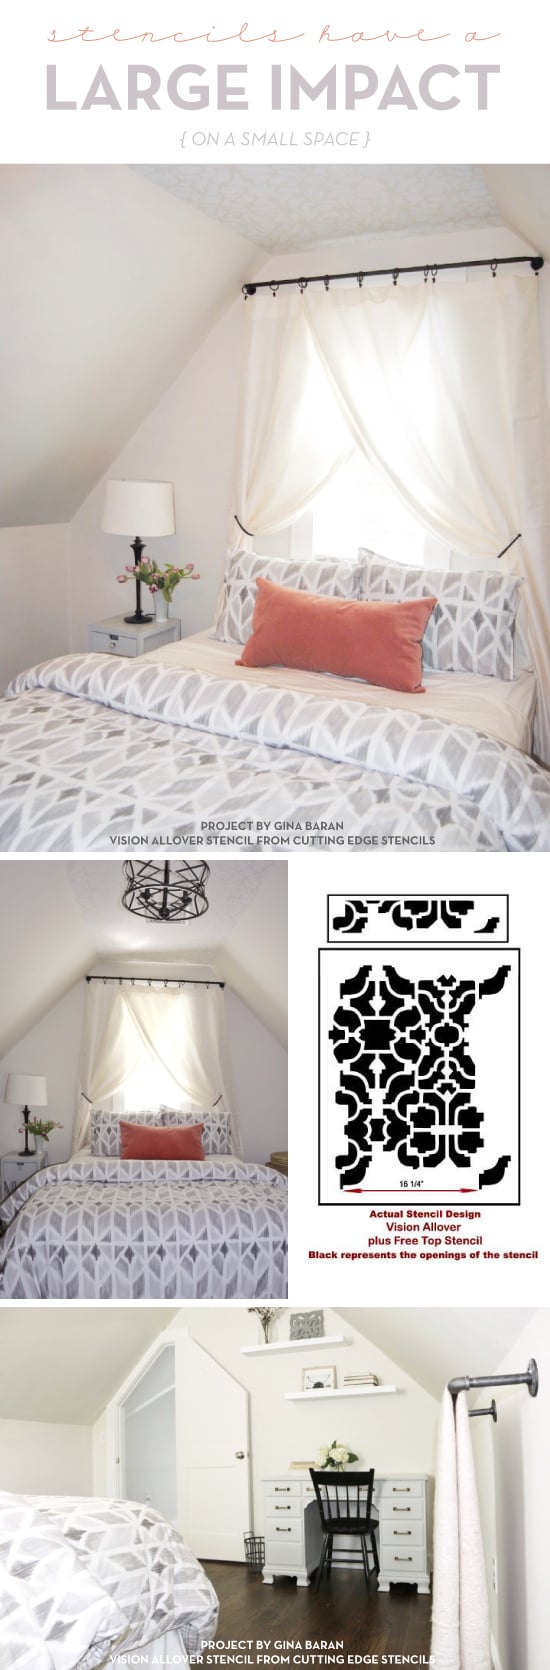 Cutting Edge Stencils shares a DIY guest bedroom makeover featuring a stenciled ceiling using the Vision allover wall pattern. http://www.cuttingedgestencils.com/vision-craft-stencil.html